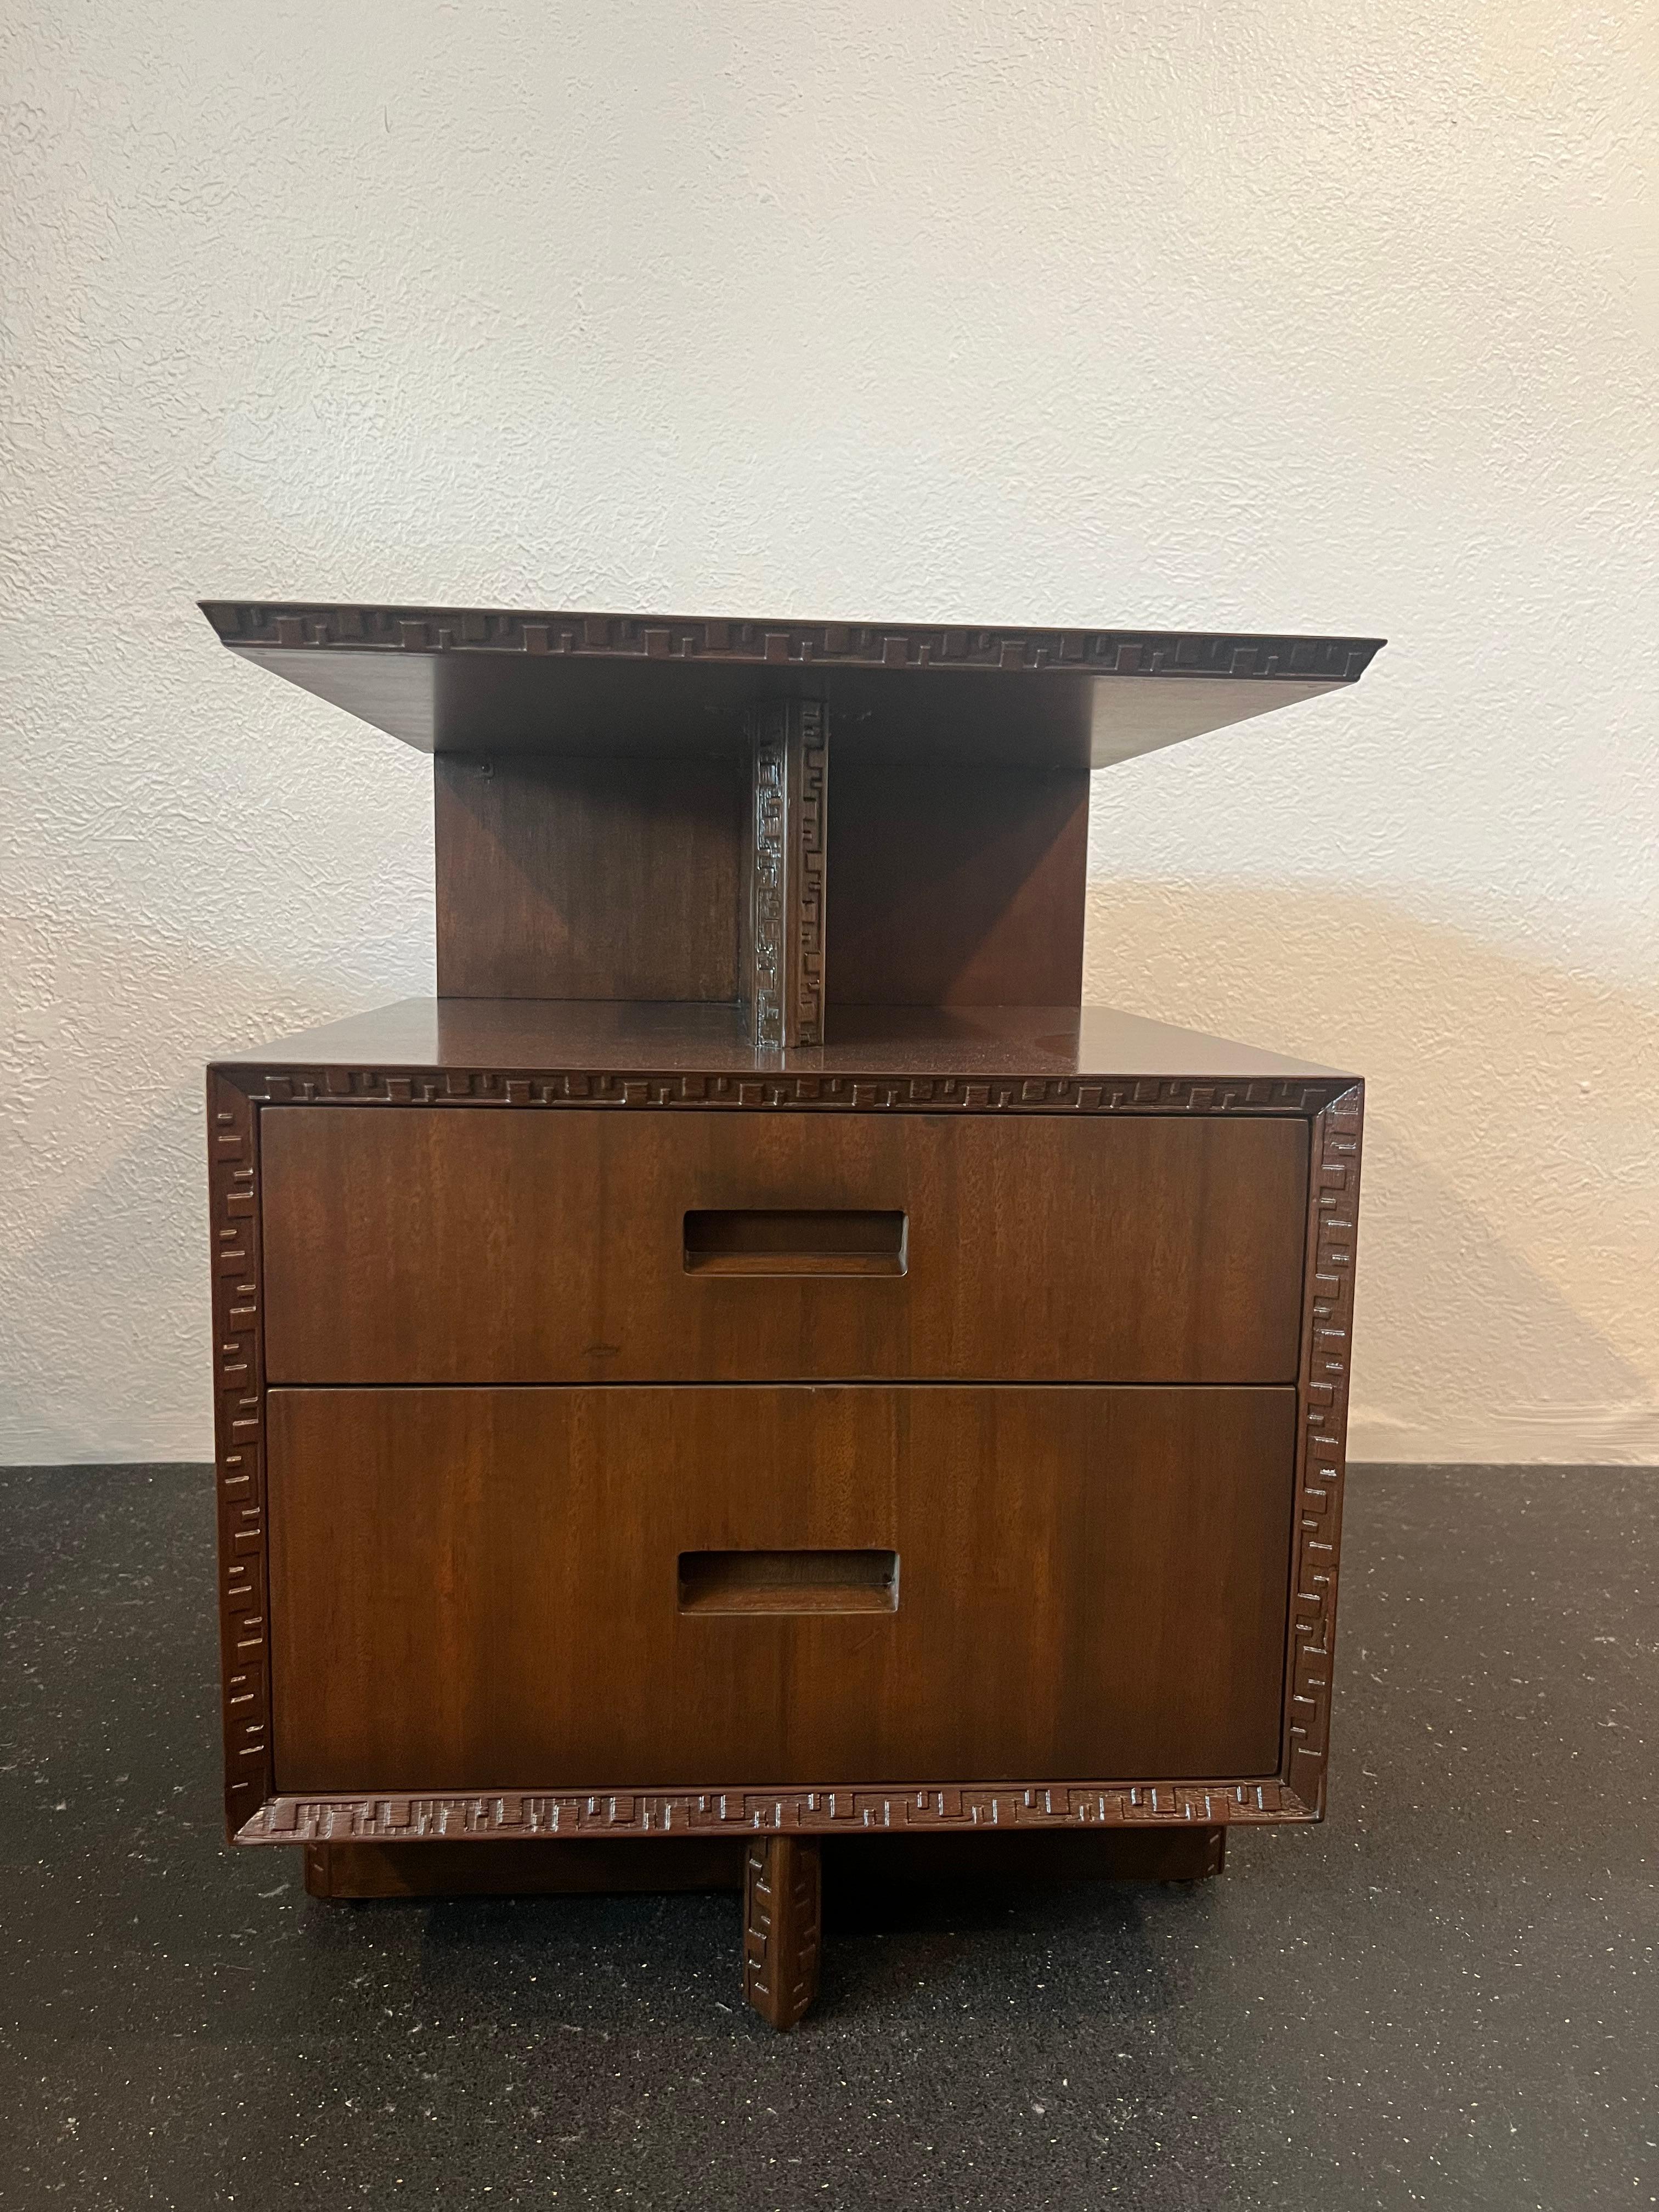 Frank Lloyd Wright for Heritage Henredon “Taliesin” side table. Recently refinished. Additional photos available upon request. Matching dresser, pair of chest and mirror also available separately.

Would work well in a variety of interiors such as